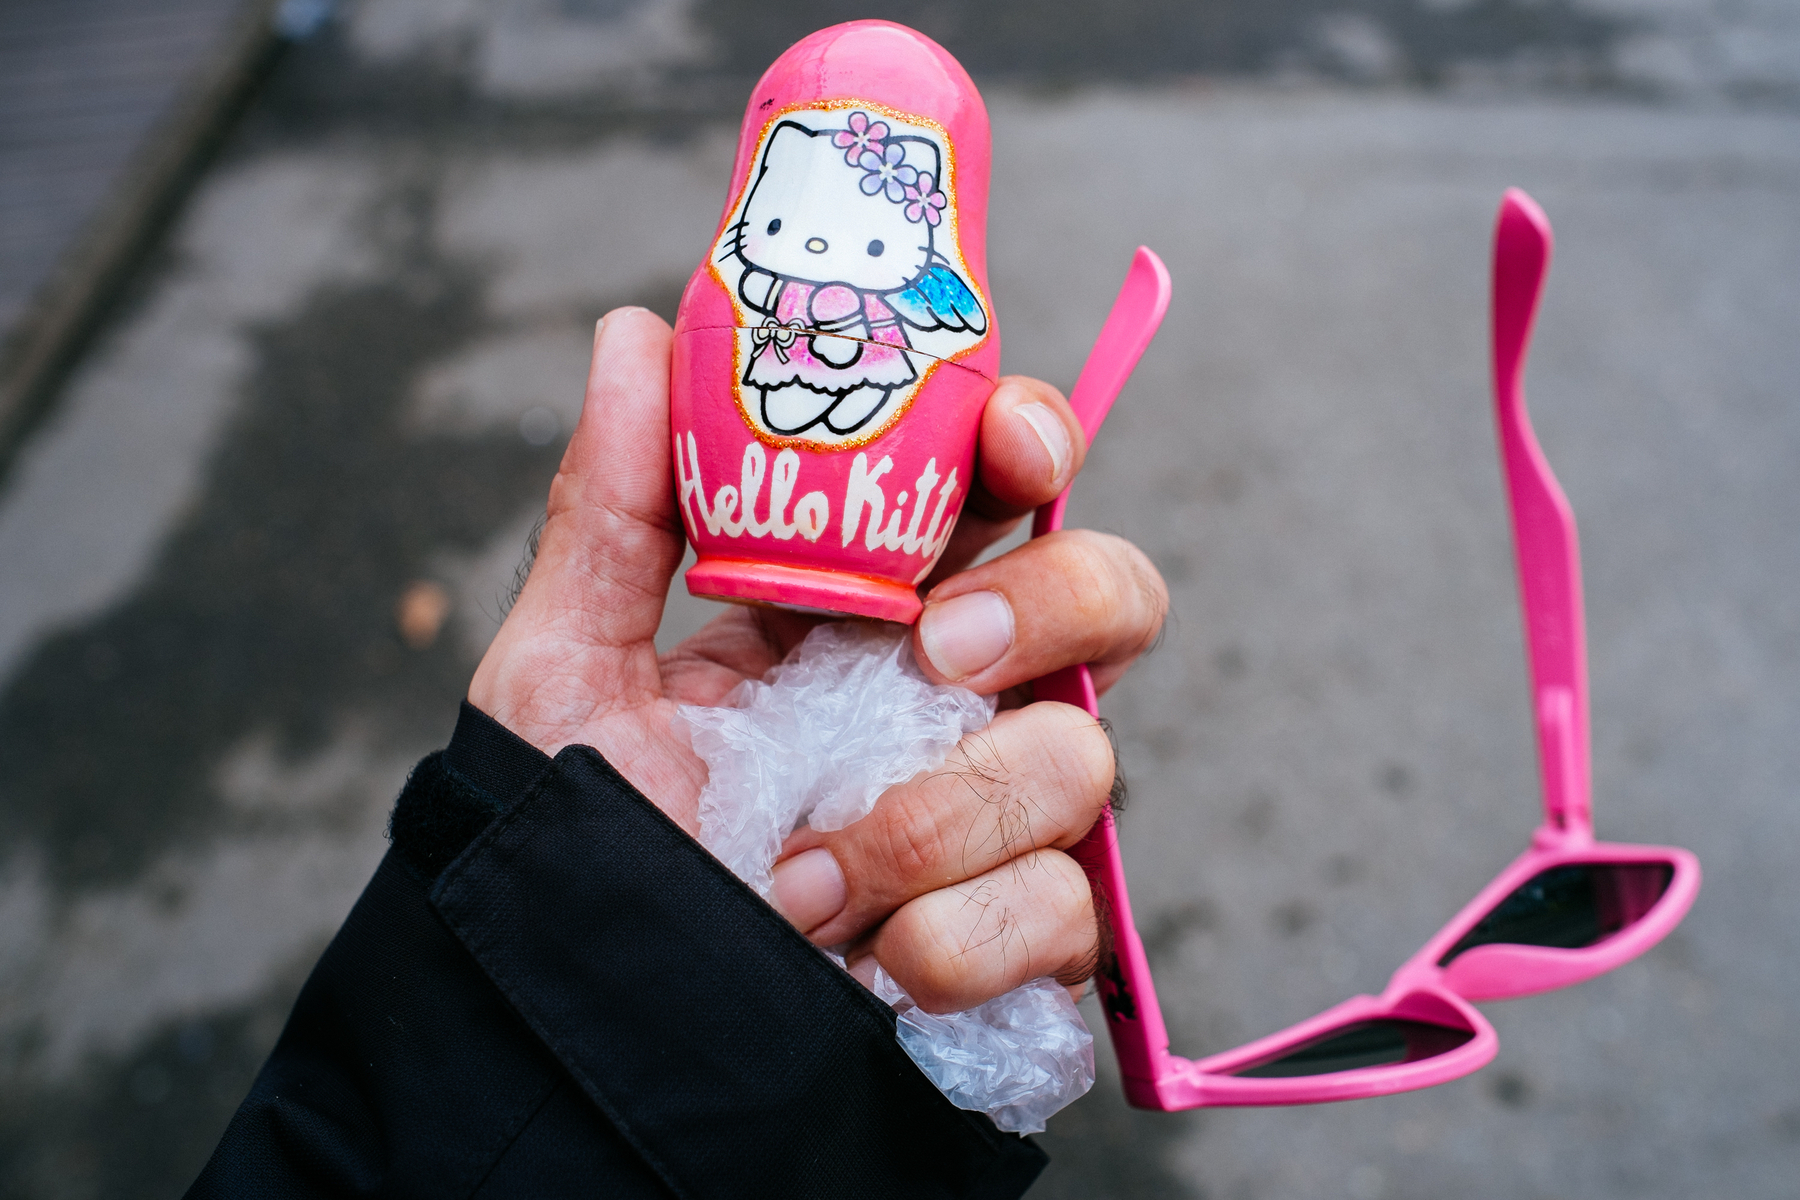 A hand holding a pair of pink shades, and a pink matryoshka doll with Hello Kitty painted on it 